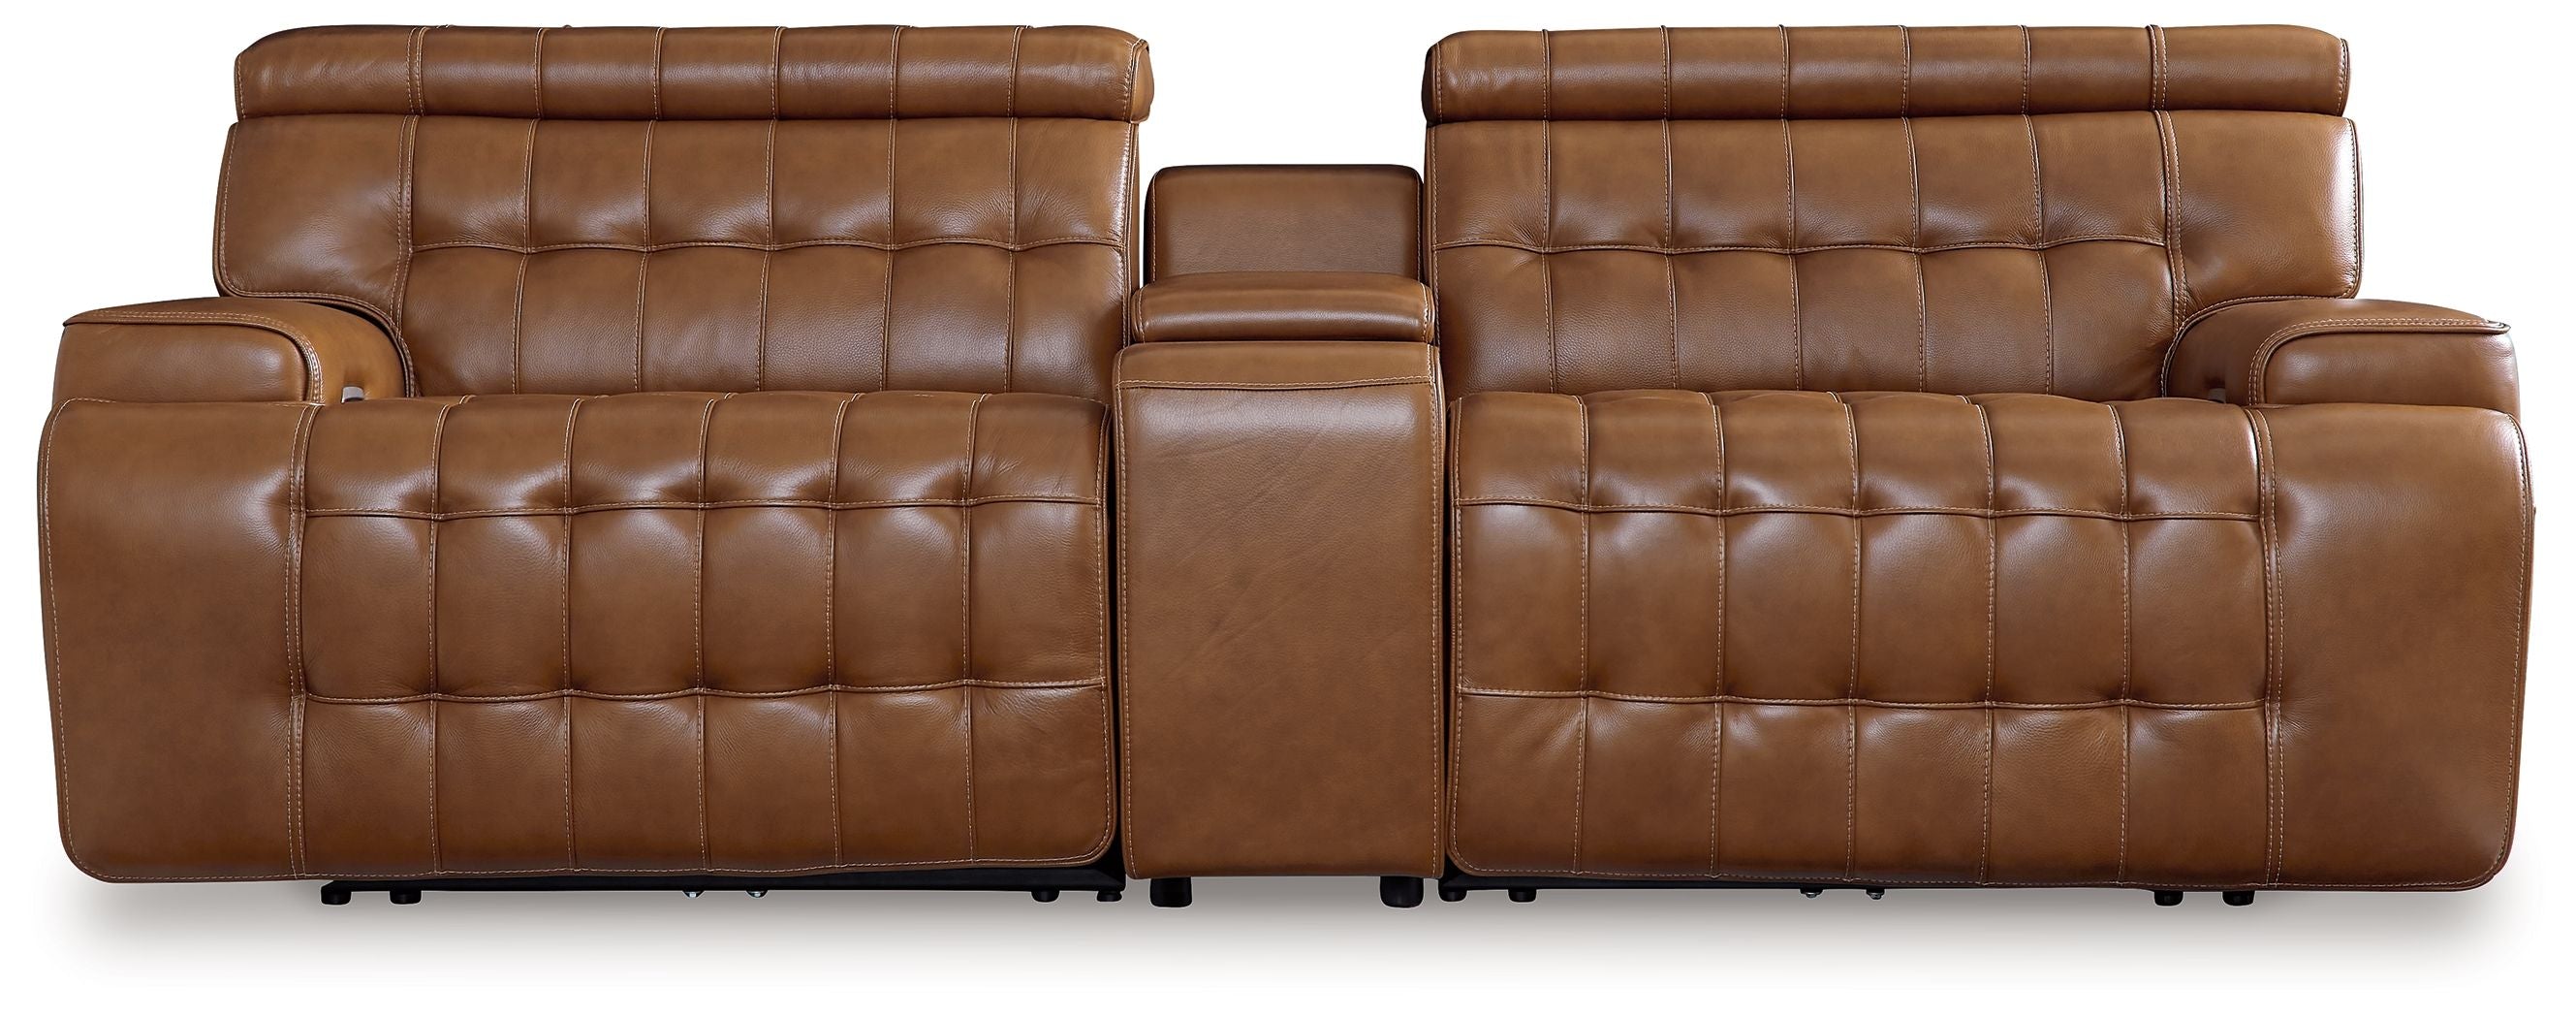 Temmpton Brown Power Leather Reclining Sectional